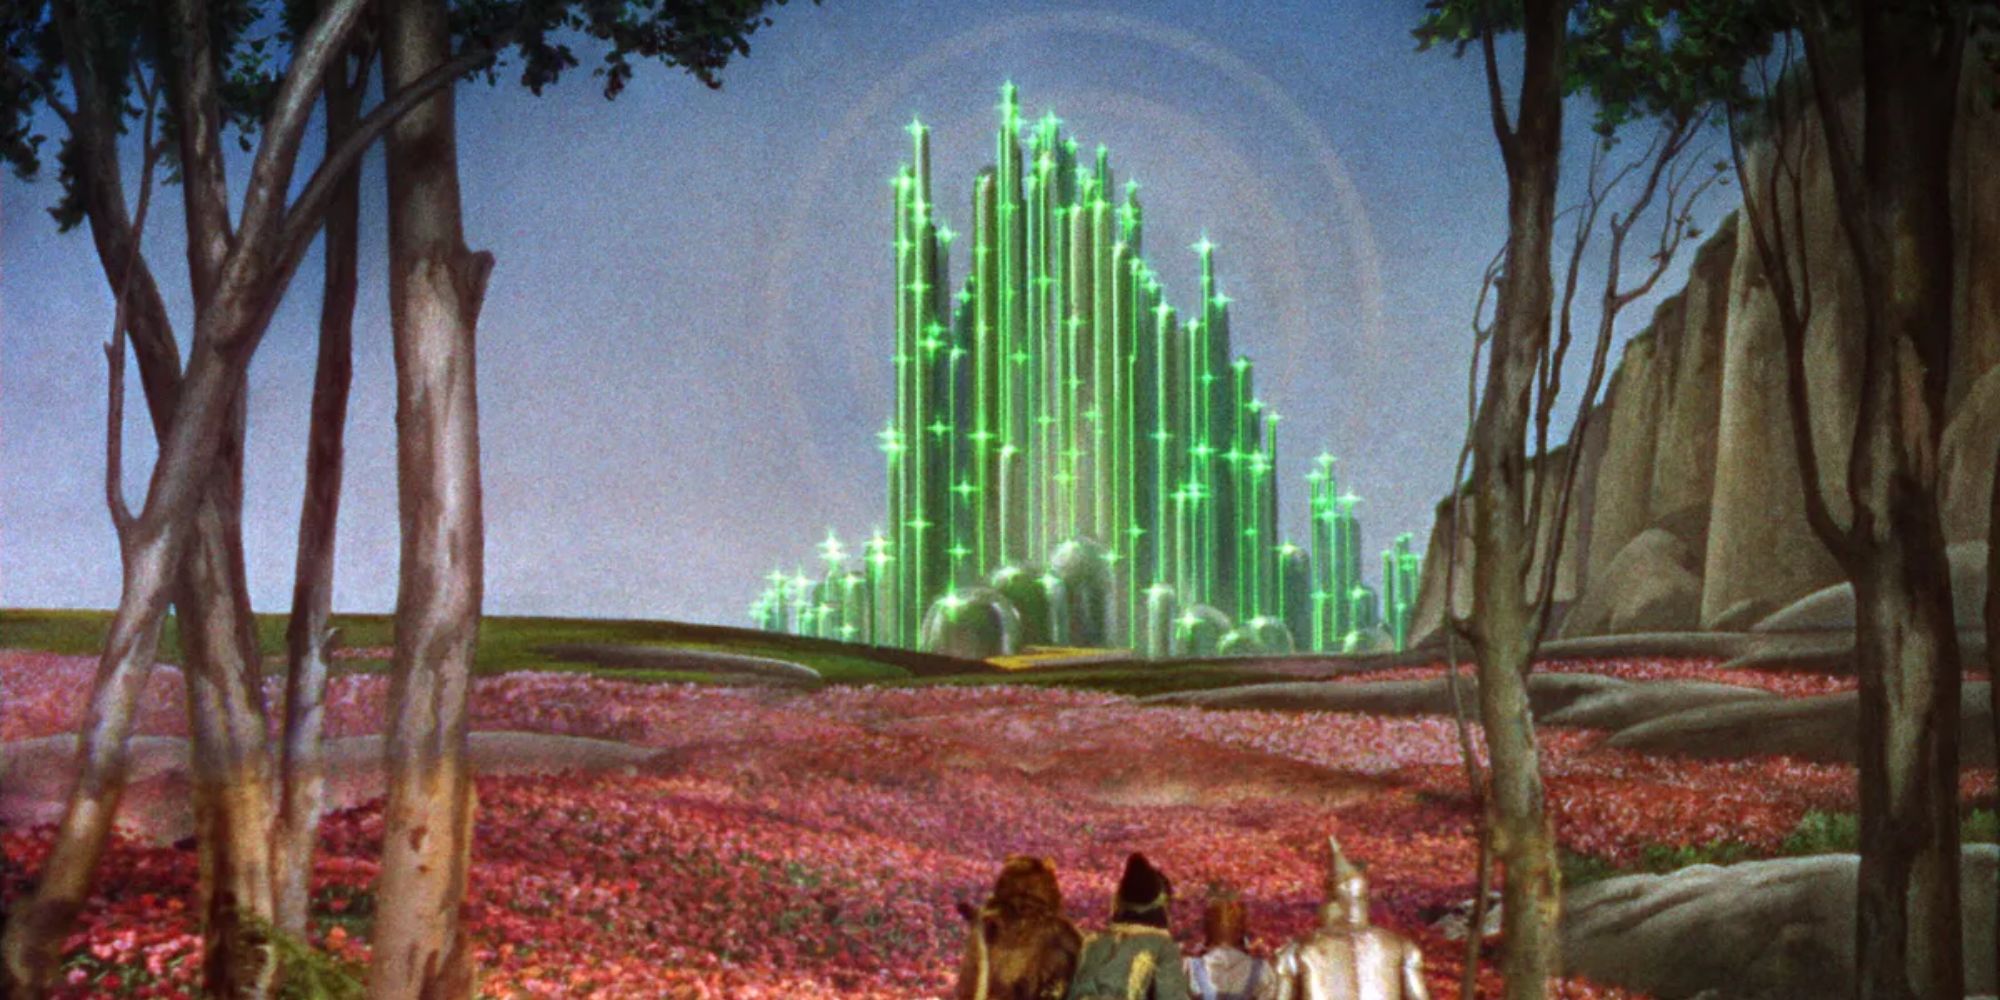 The travelers spot the Emerald City from a distance